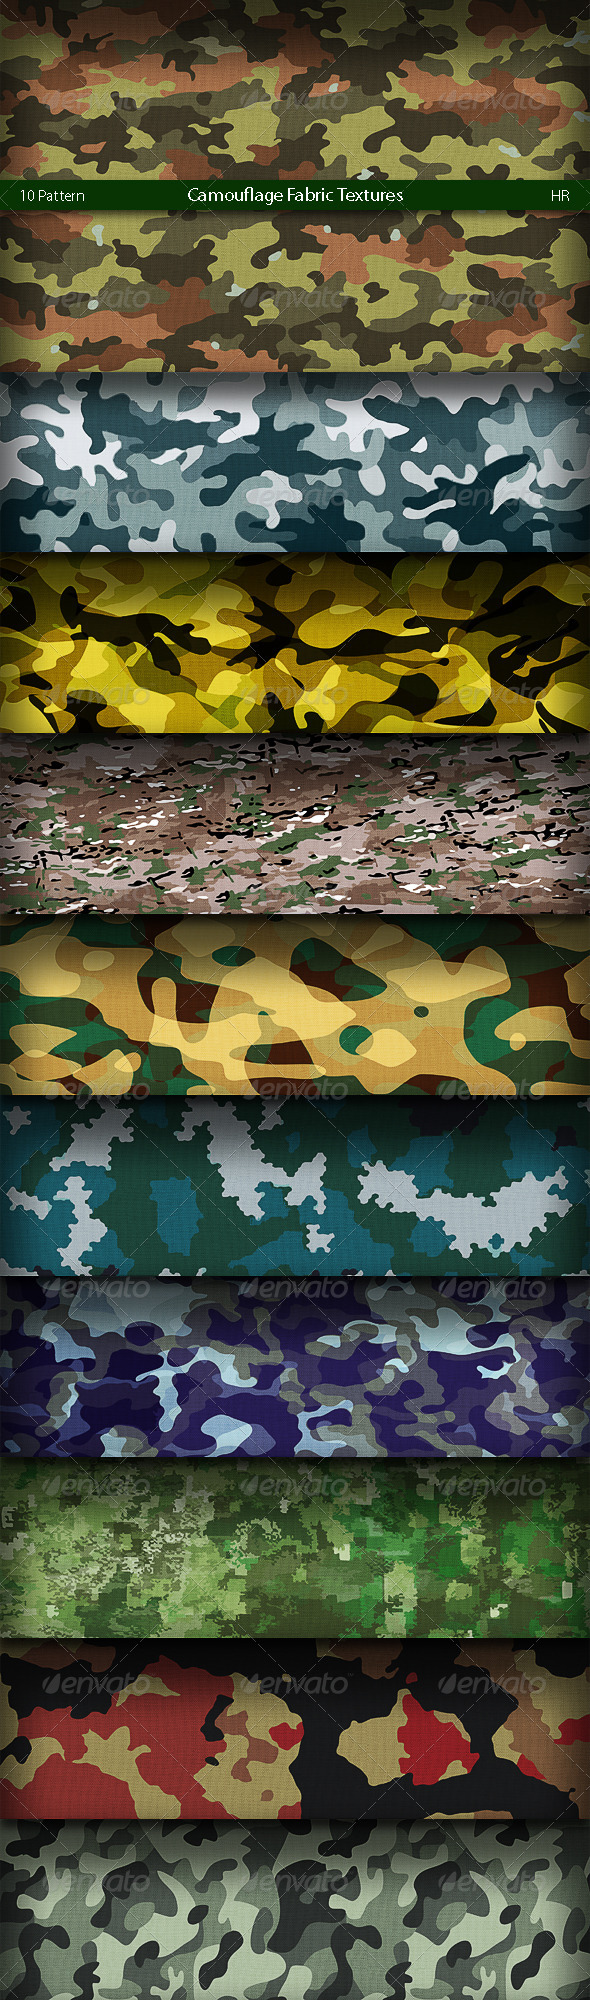 Camouflage Fabric Textures - 3Docean 4881459